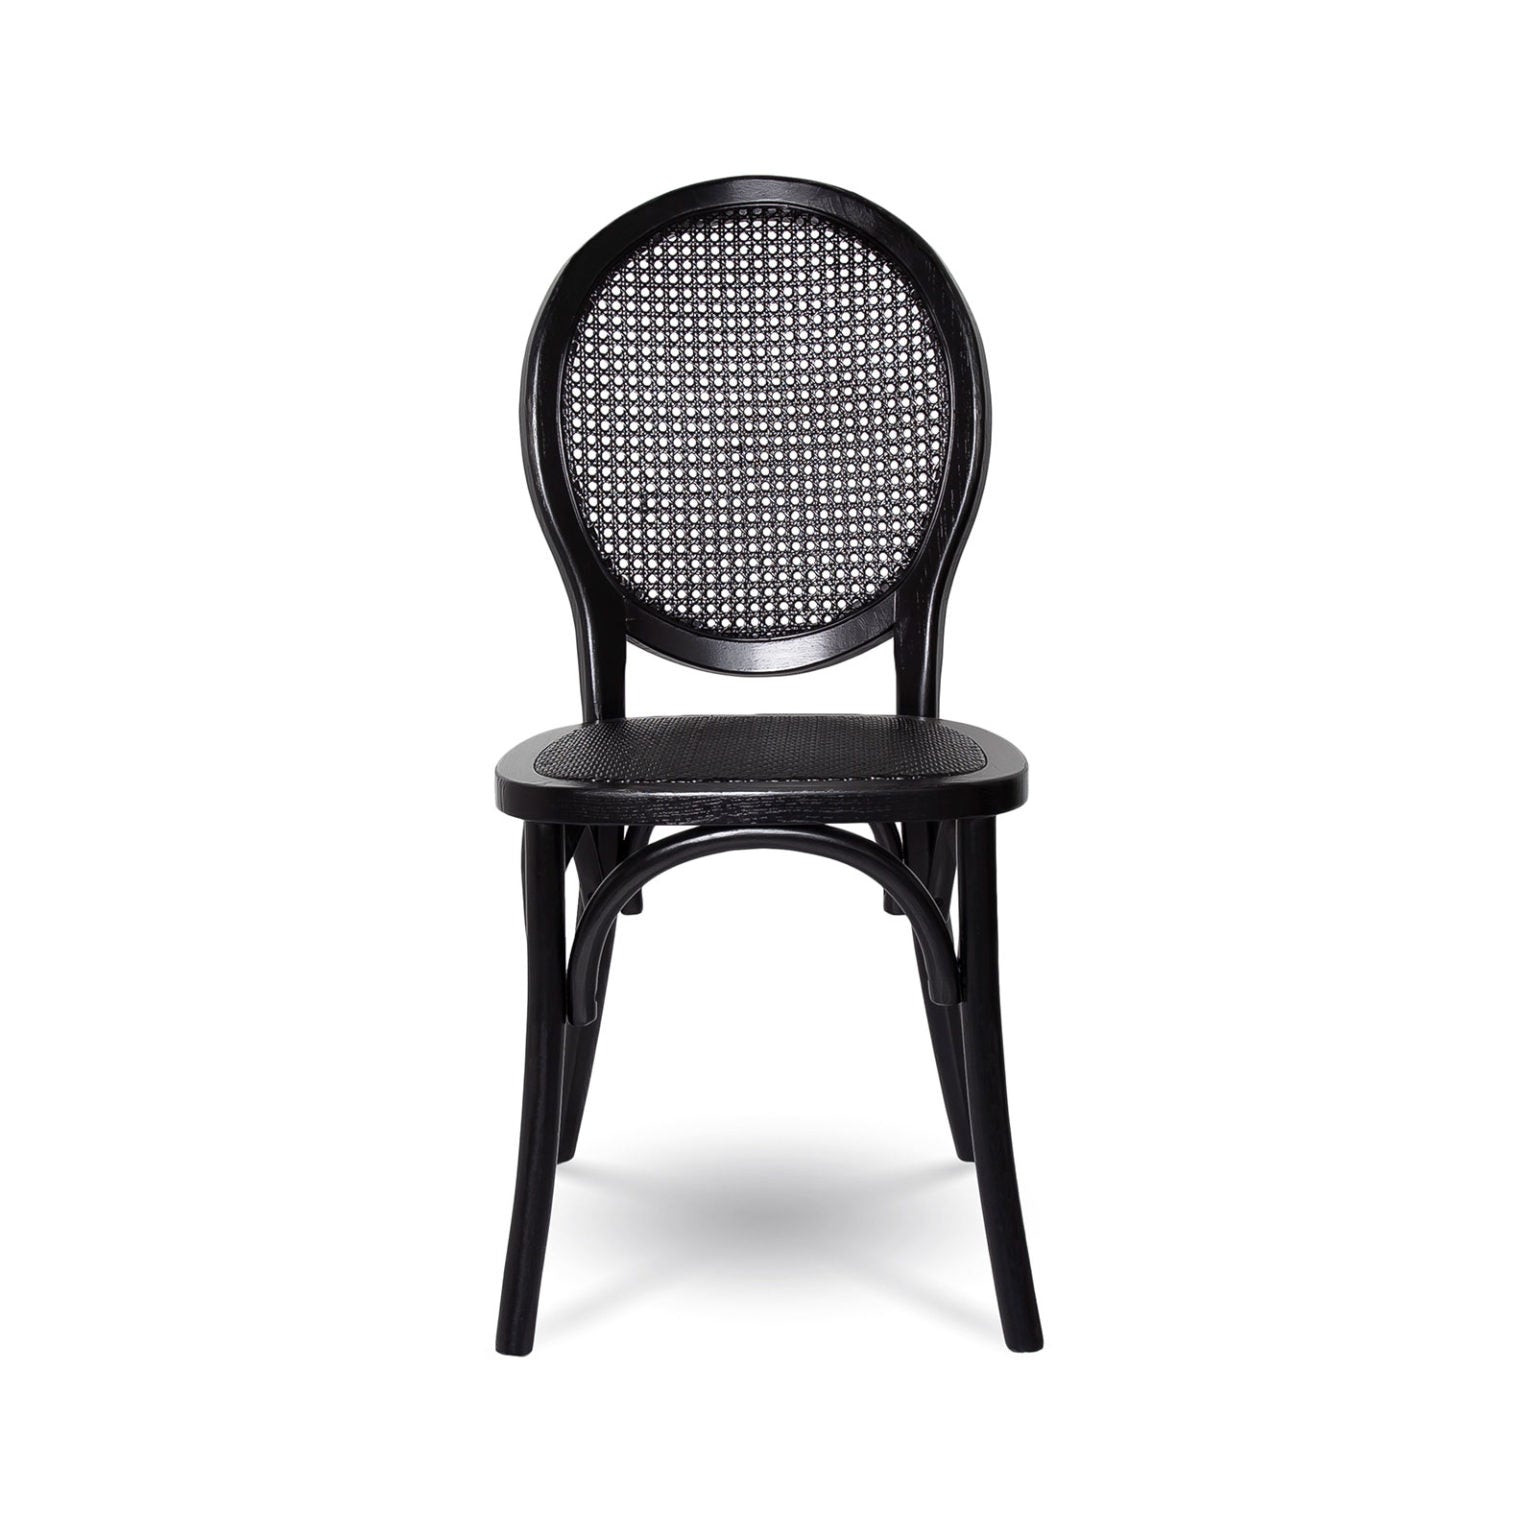 Product shot of black round back chair with cane detail on back and seat